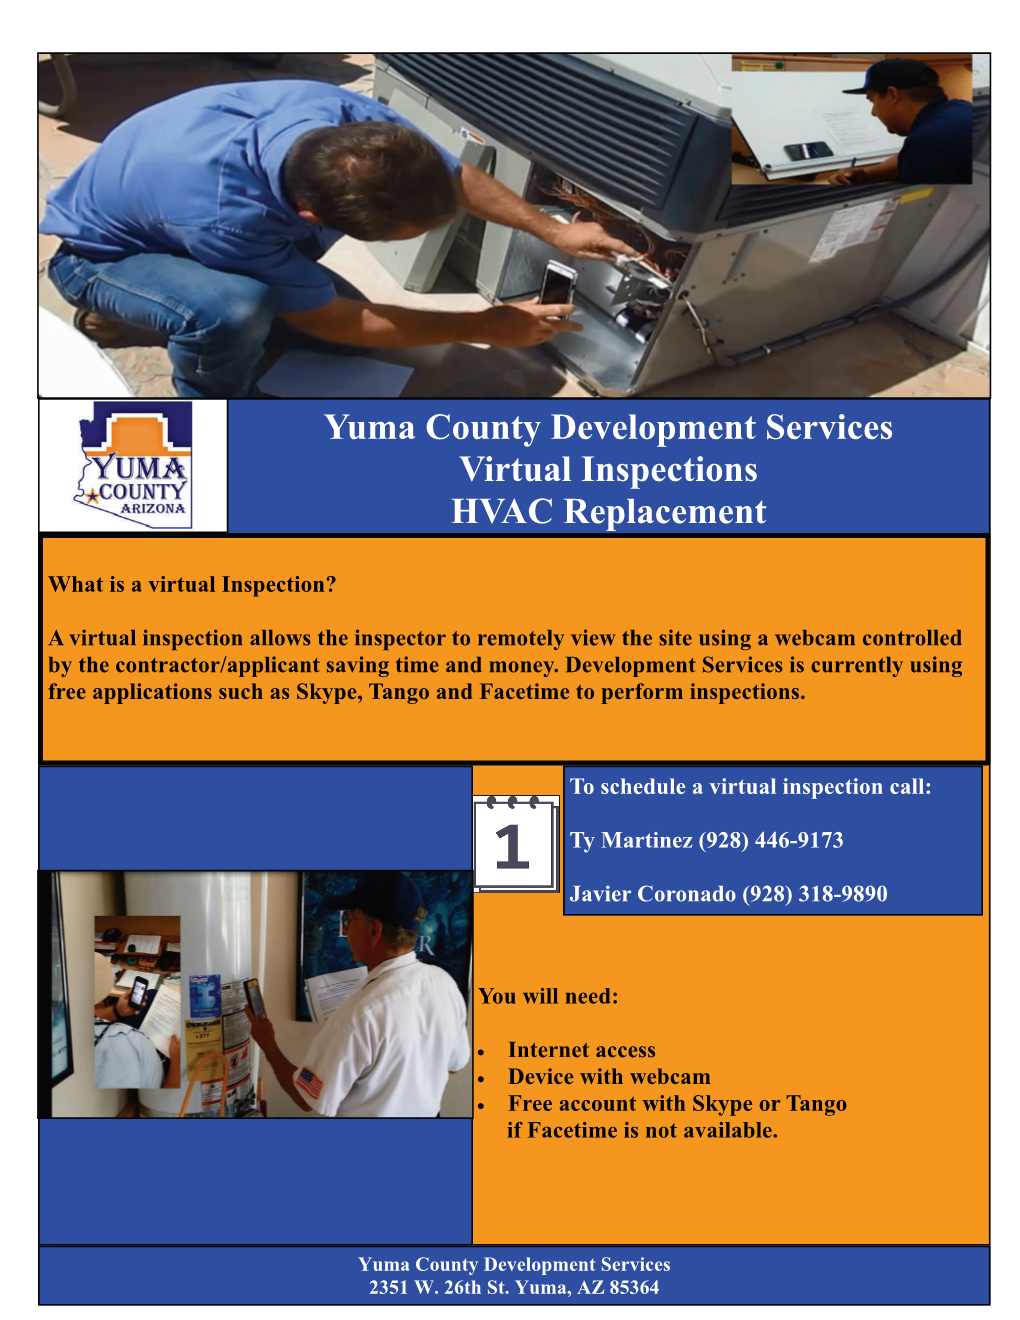 Yuma County Development Services Virtual Inspections HVAC Replacement